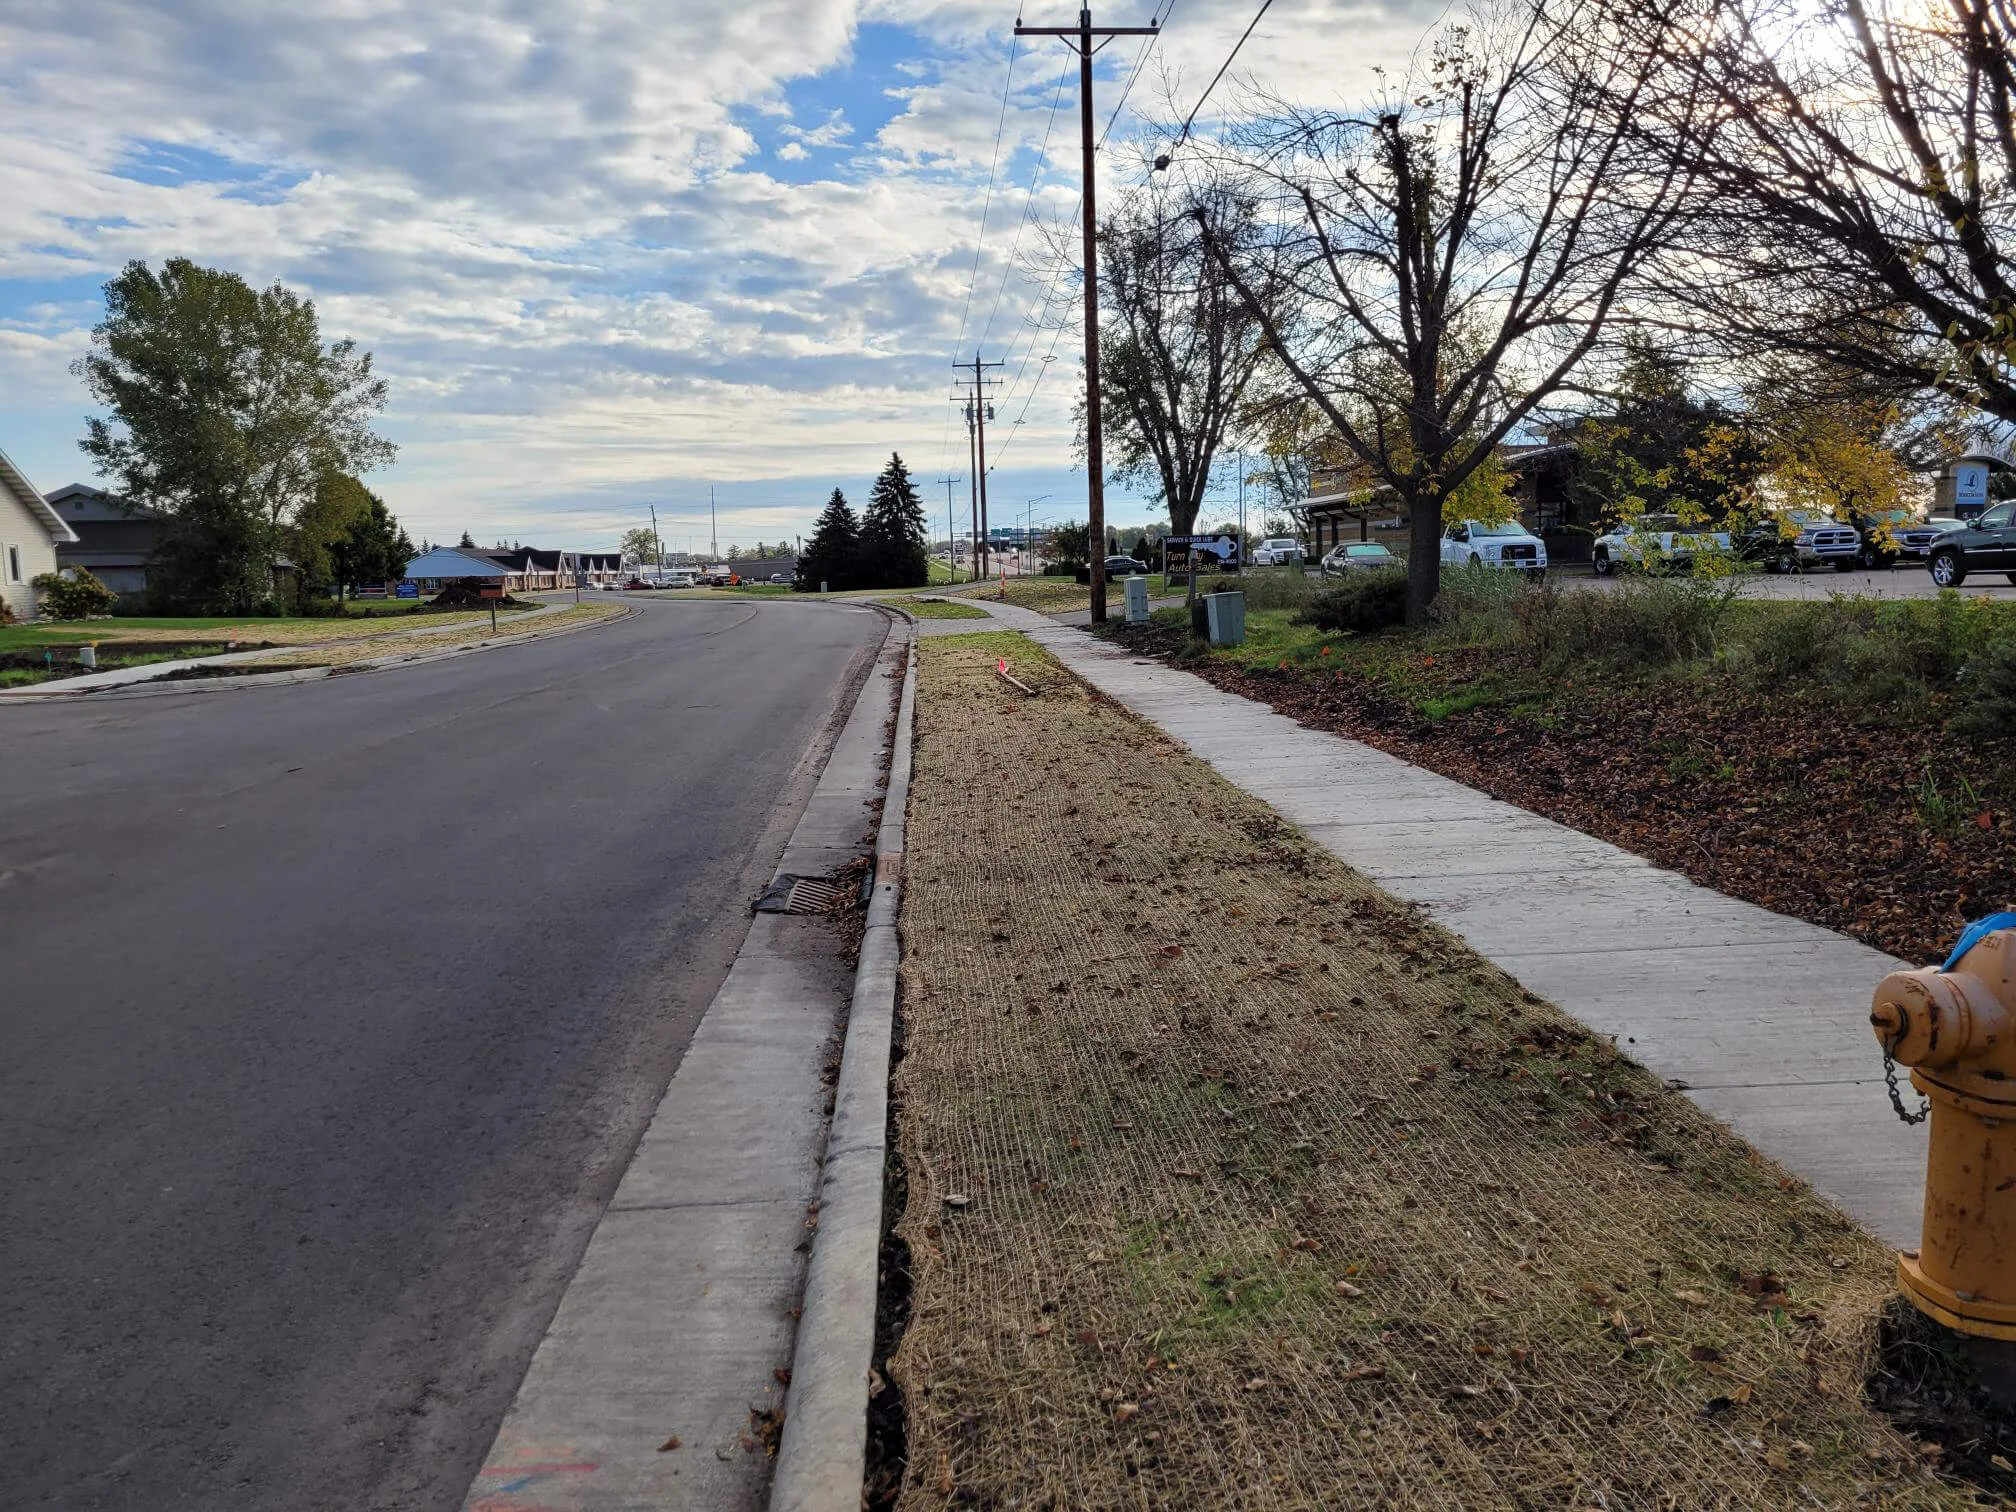 Landscaping work is completed between the sidewalk and road on a small road in the Town of Algoma